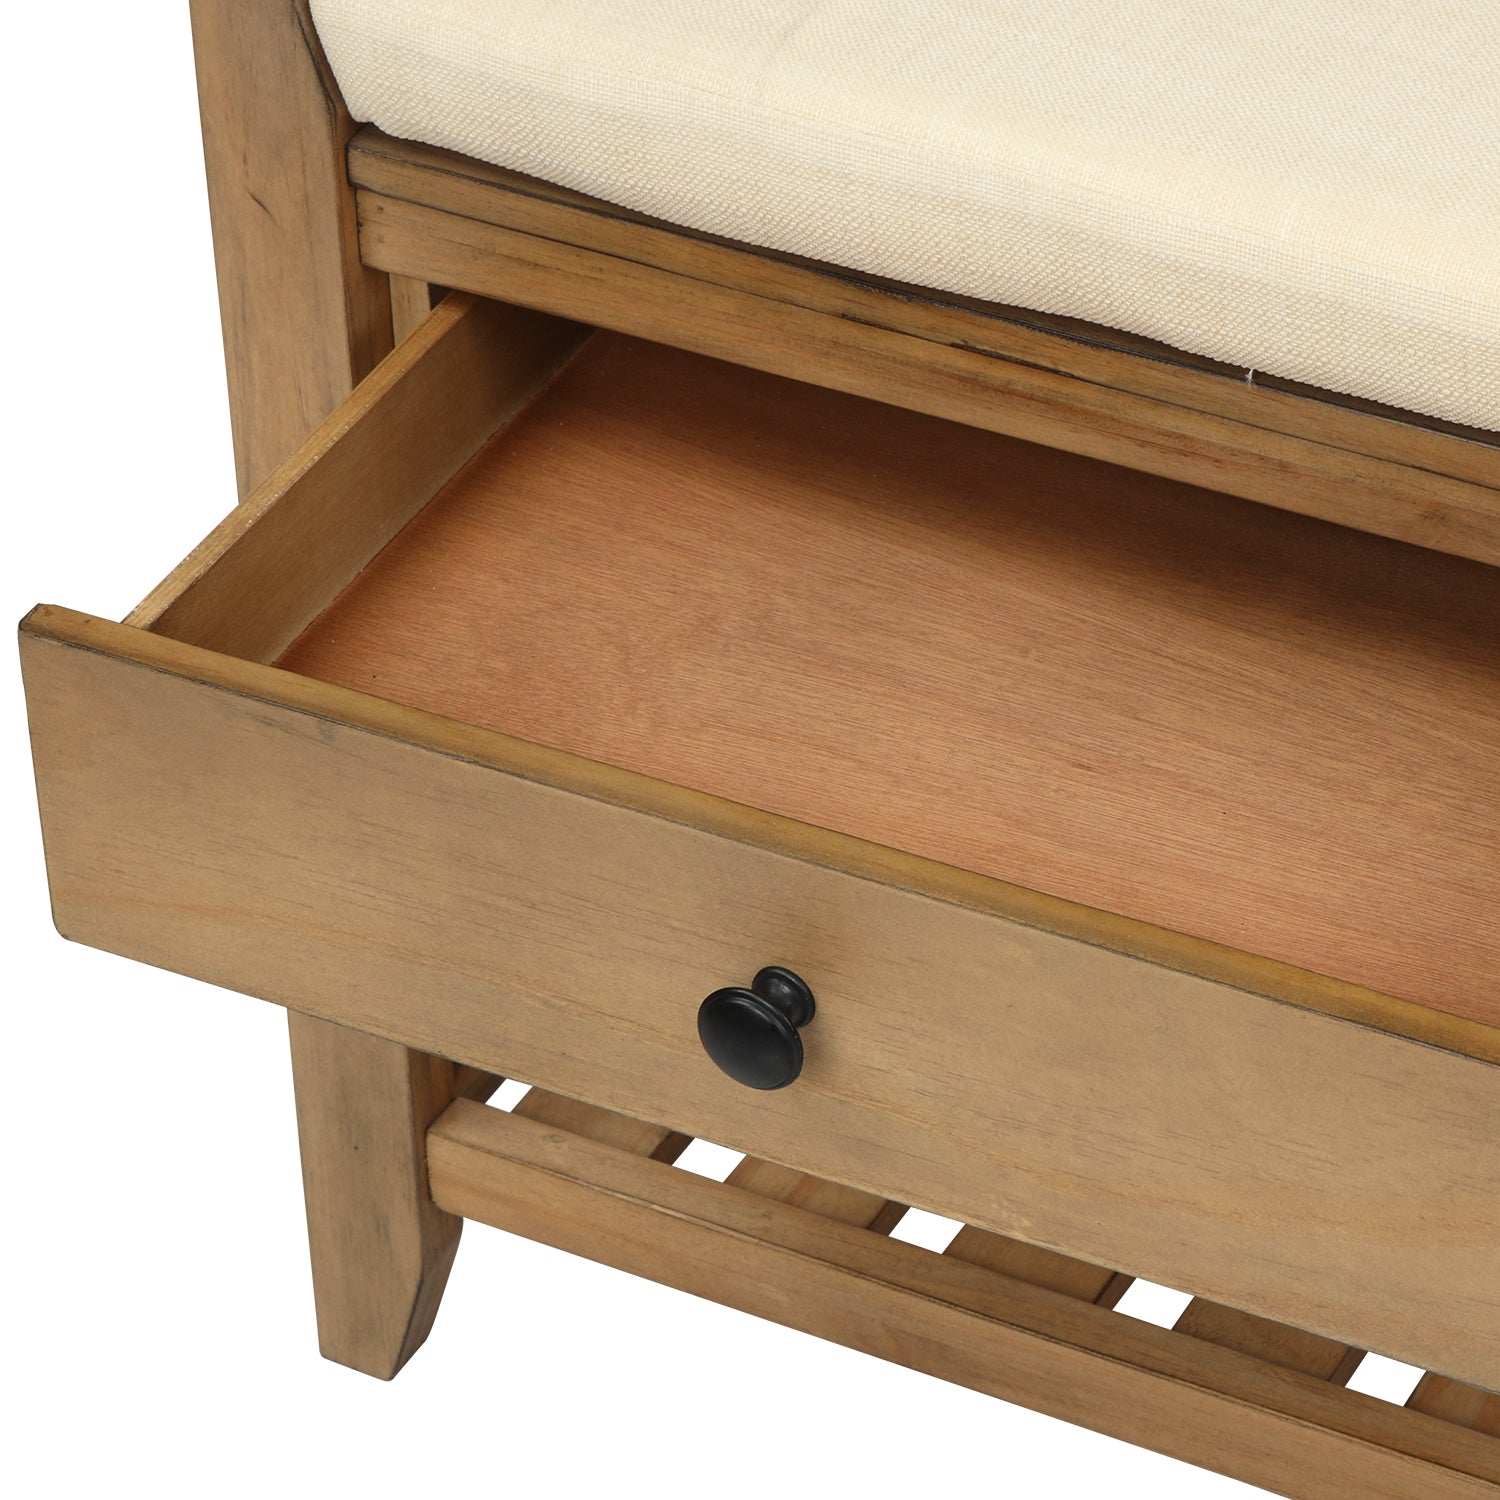 39" Entryway Storage Seating Bench with cushion